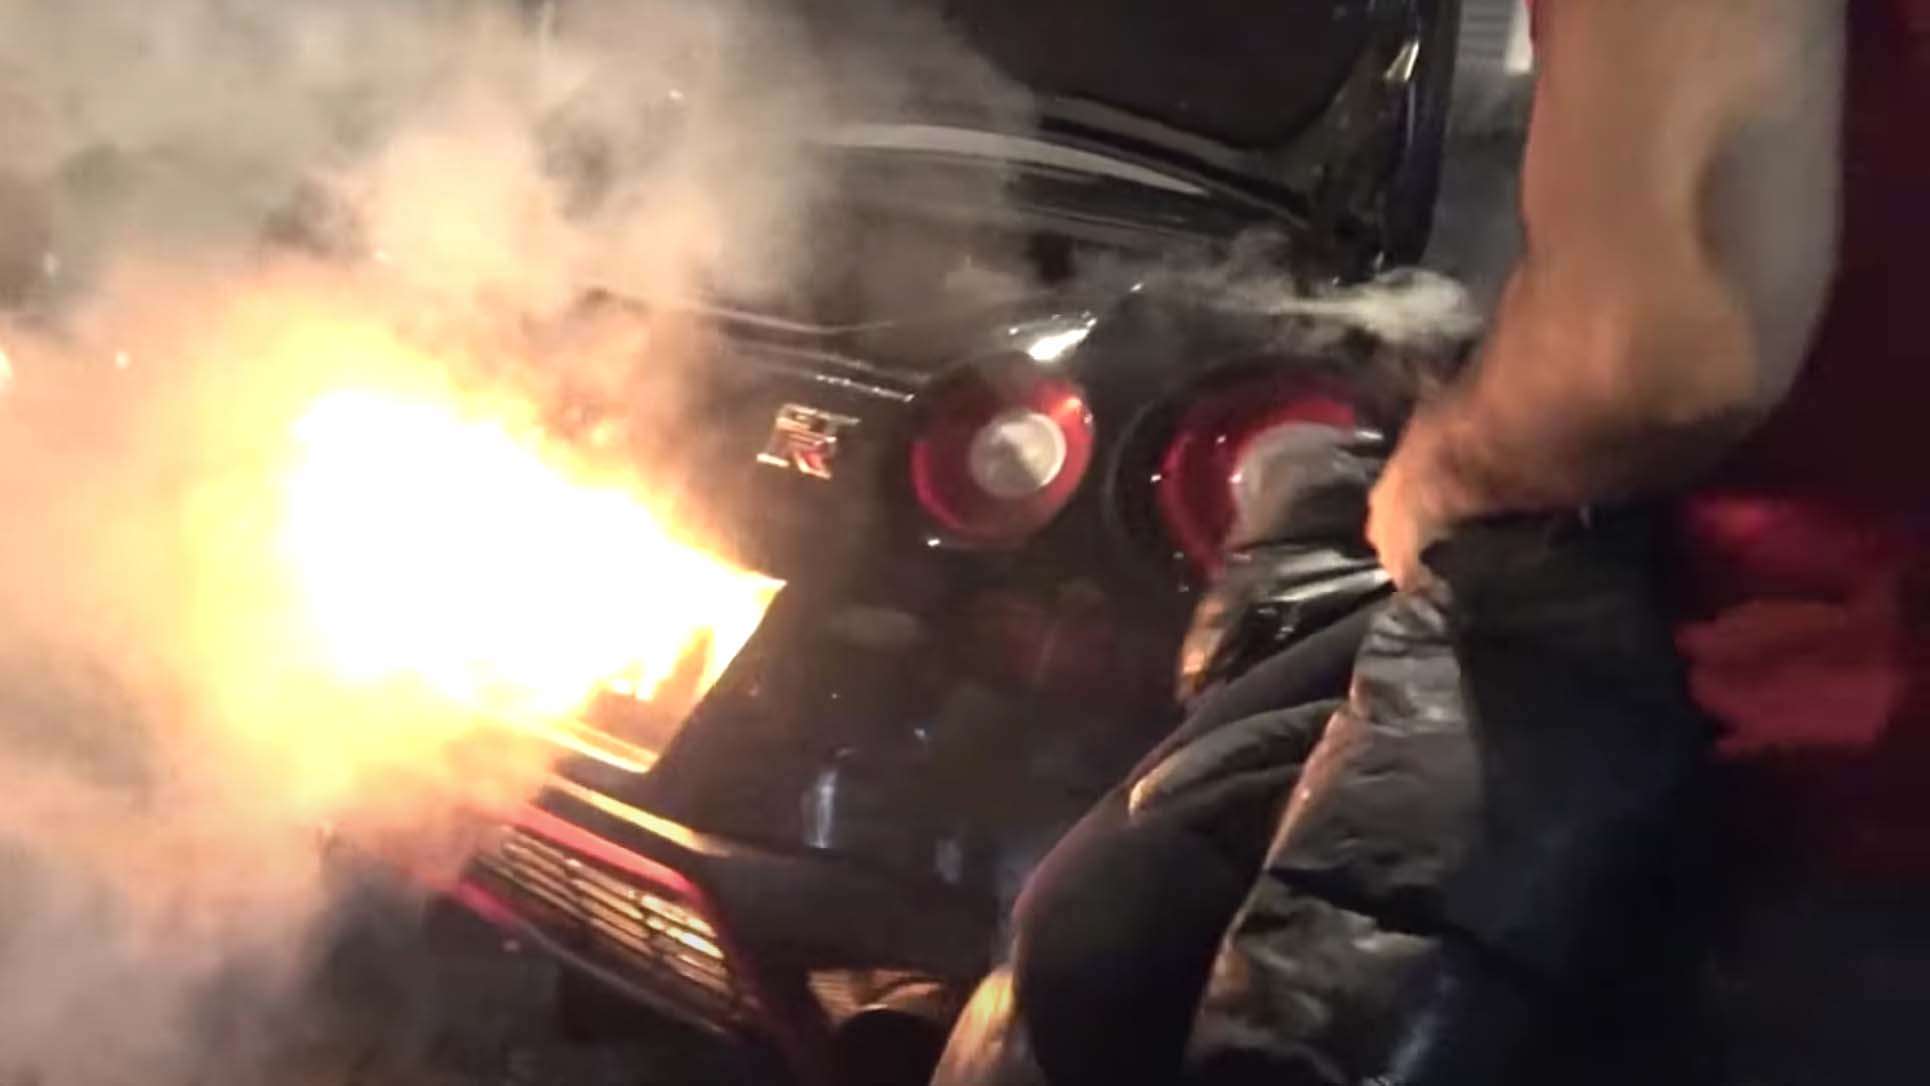 Nissan GTR Goes up in flames